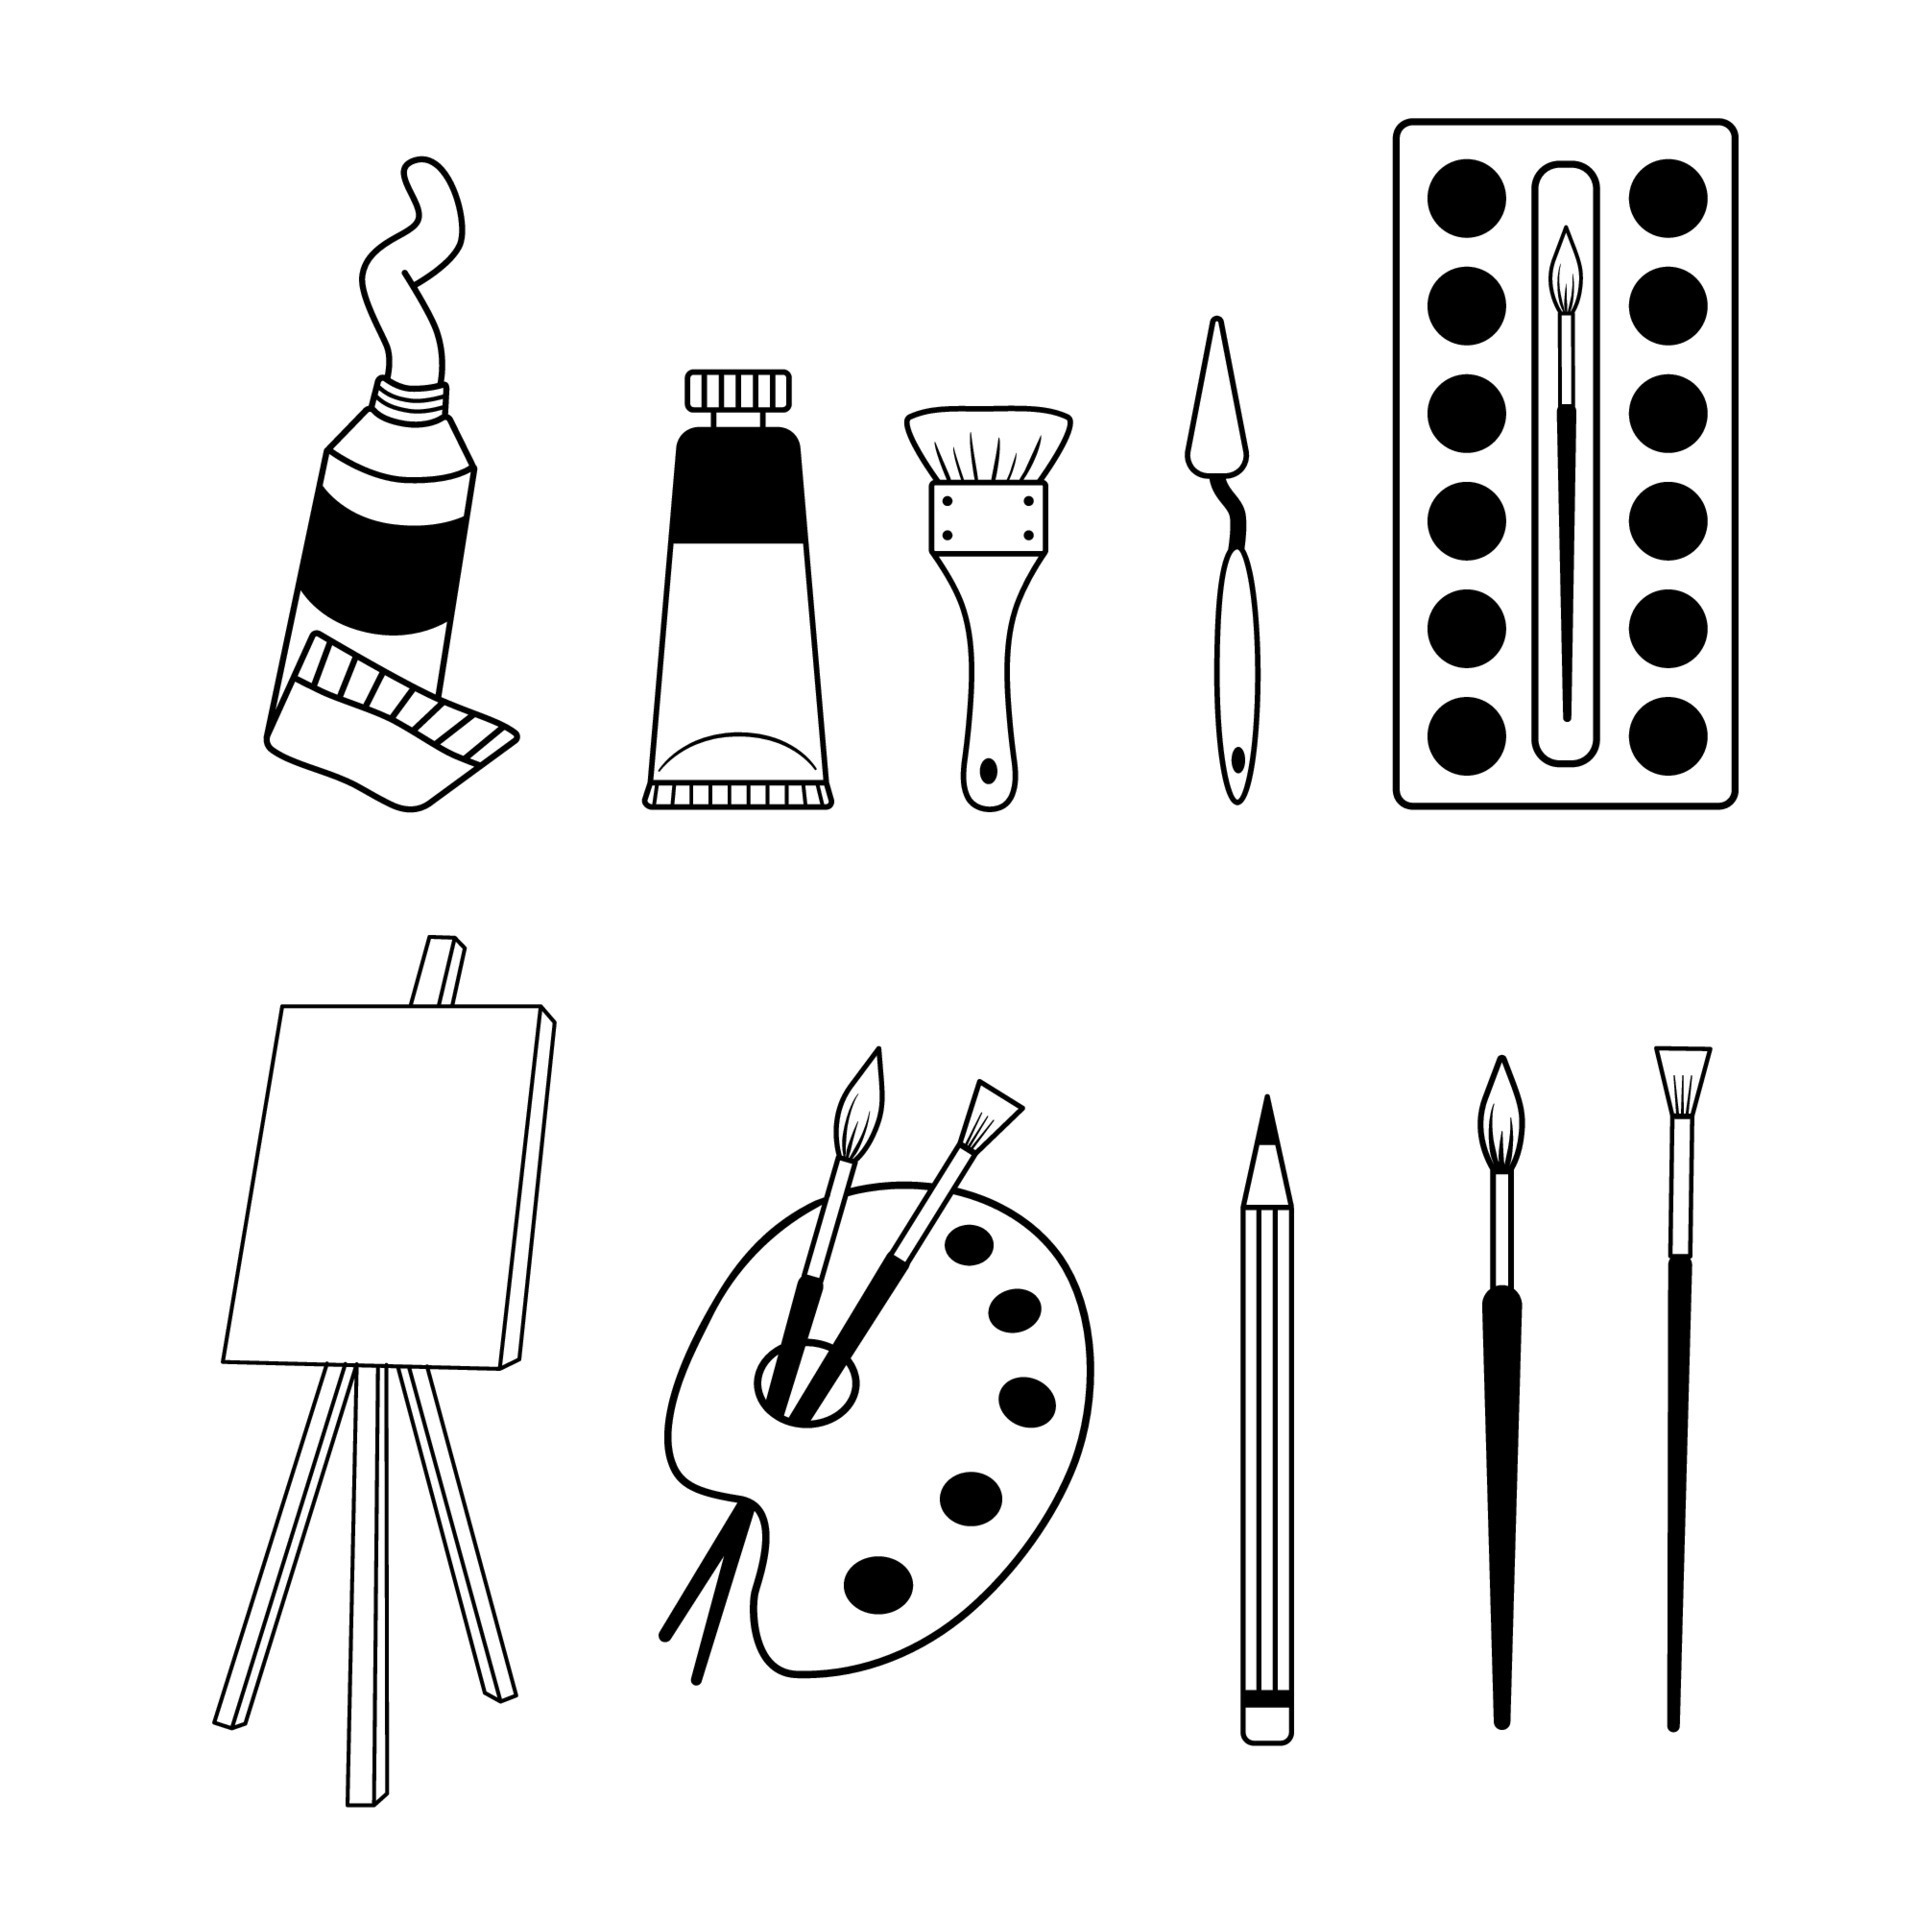 Painting Accessories Vector Cartoon Illustration. Canvas, Picture, Easel,  Paintbrush, Brush, Color, Palette, Art, Paint, Supply, Drawing 